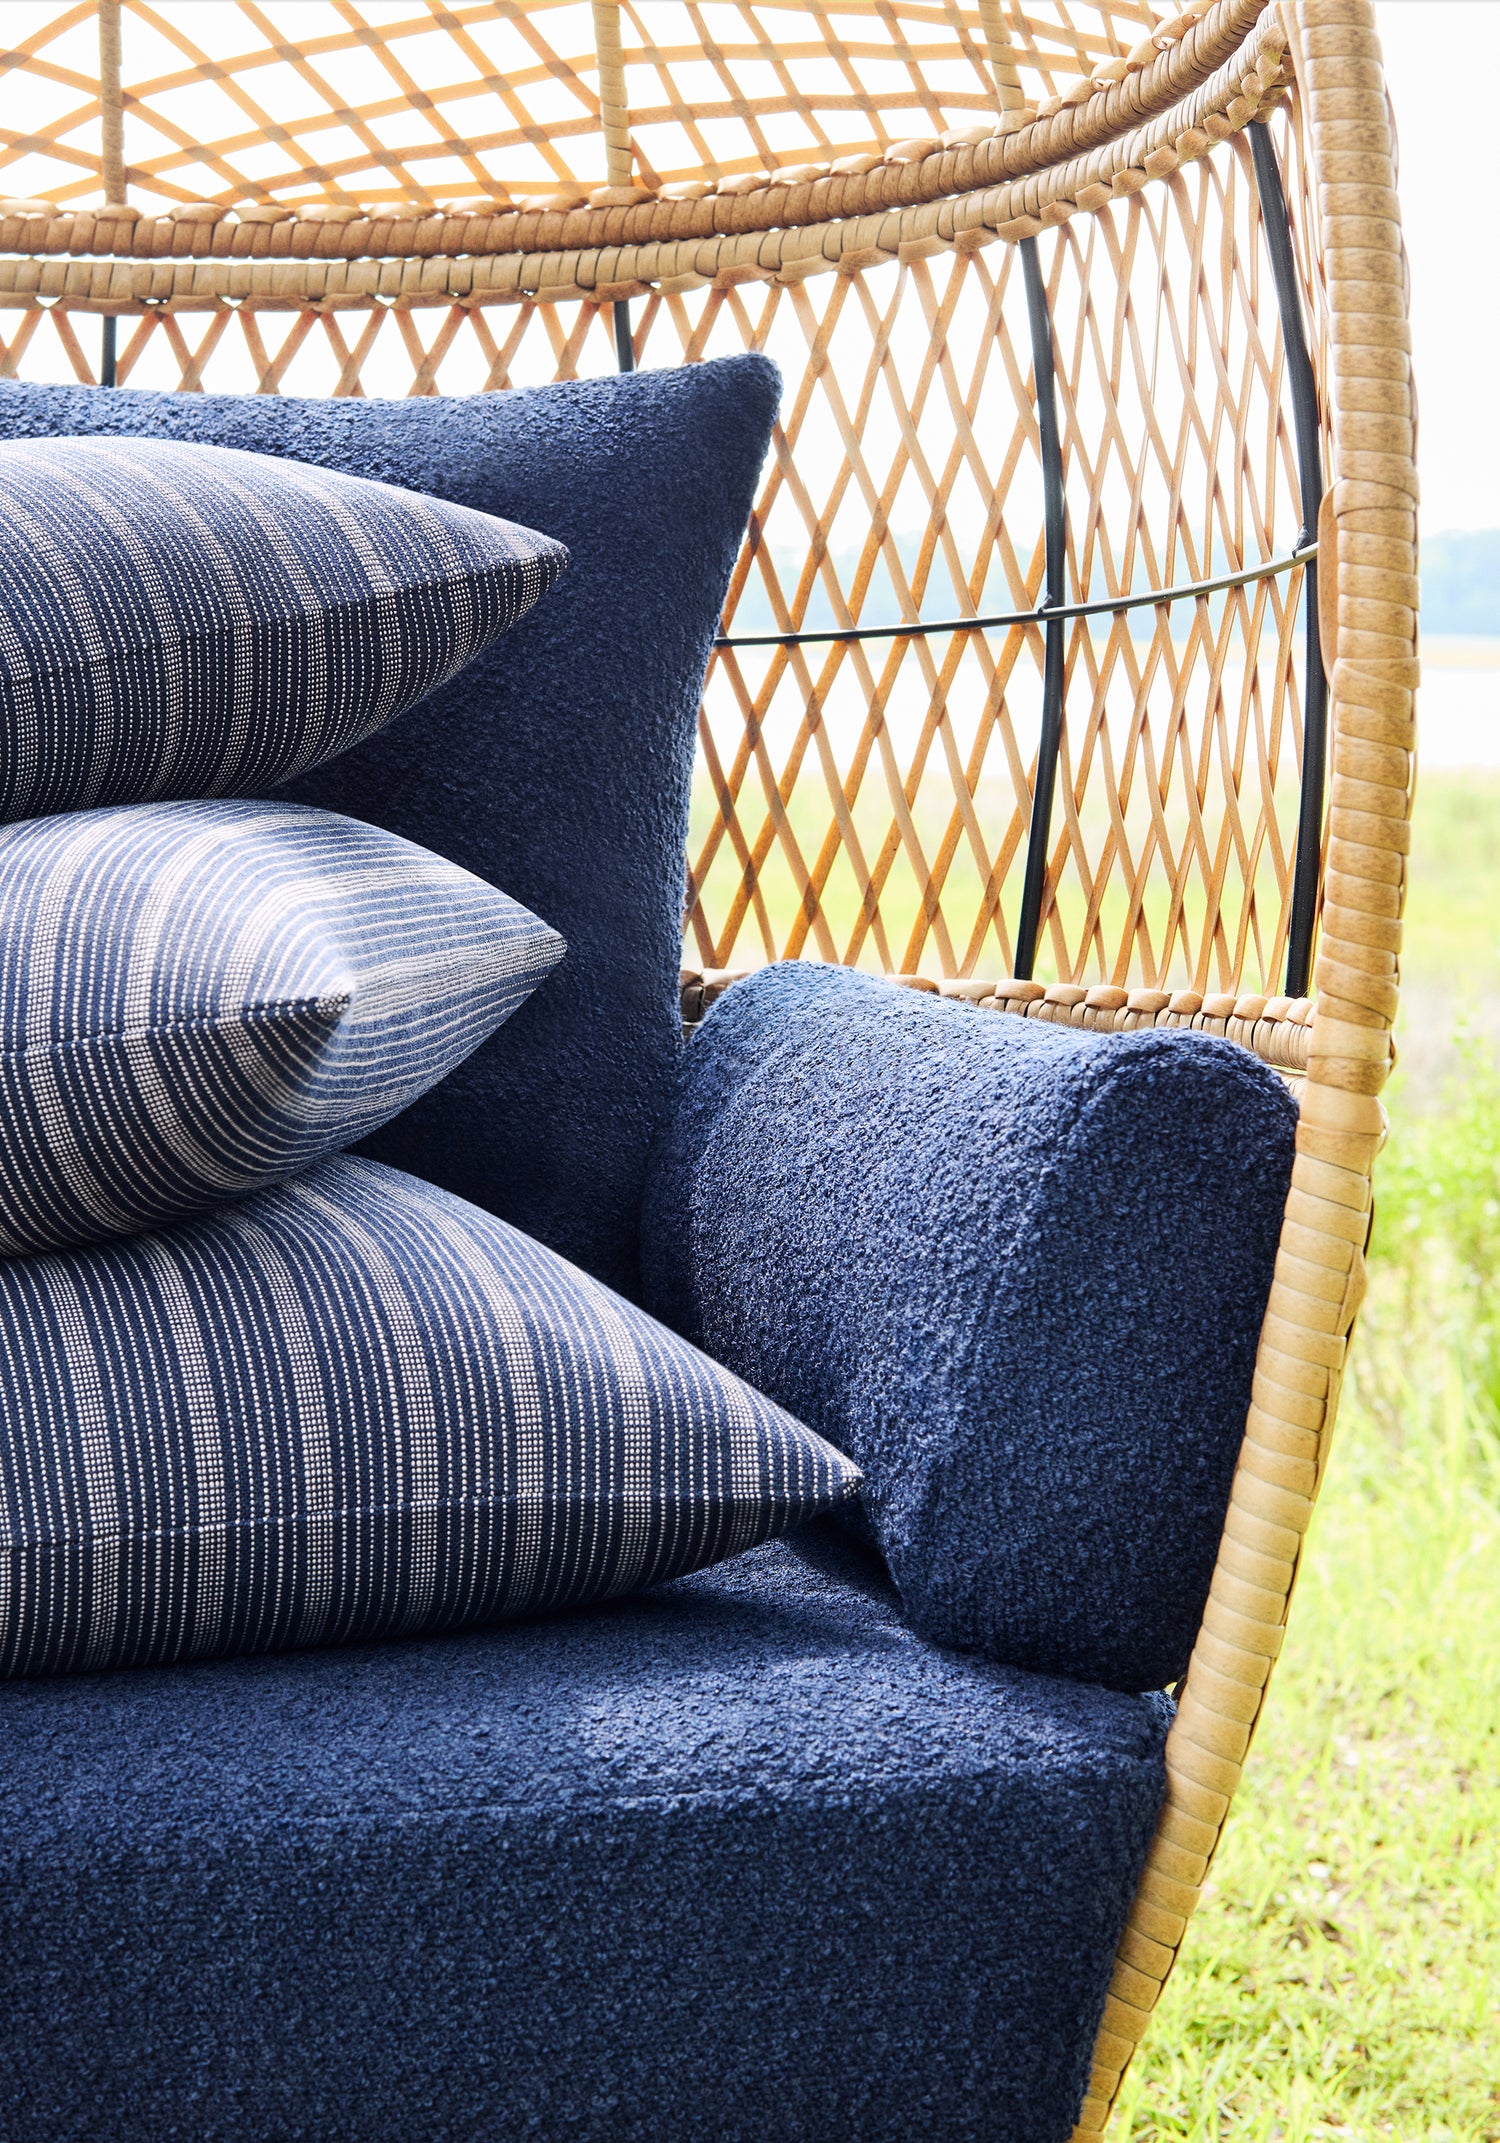 Detail of Chair cushion in Capra woven fabric in navy color - pattern number W8591 - by Thibaut fabrics